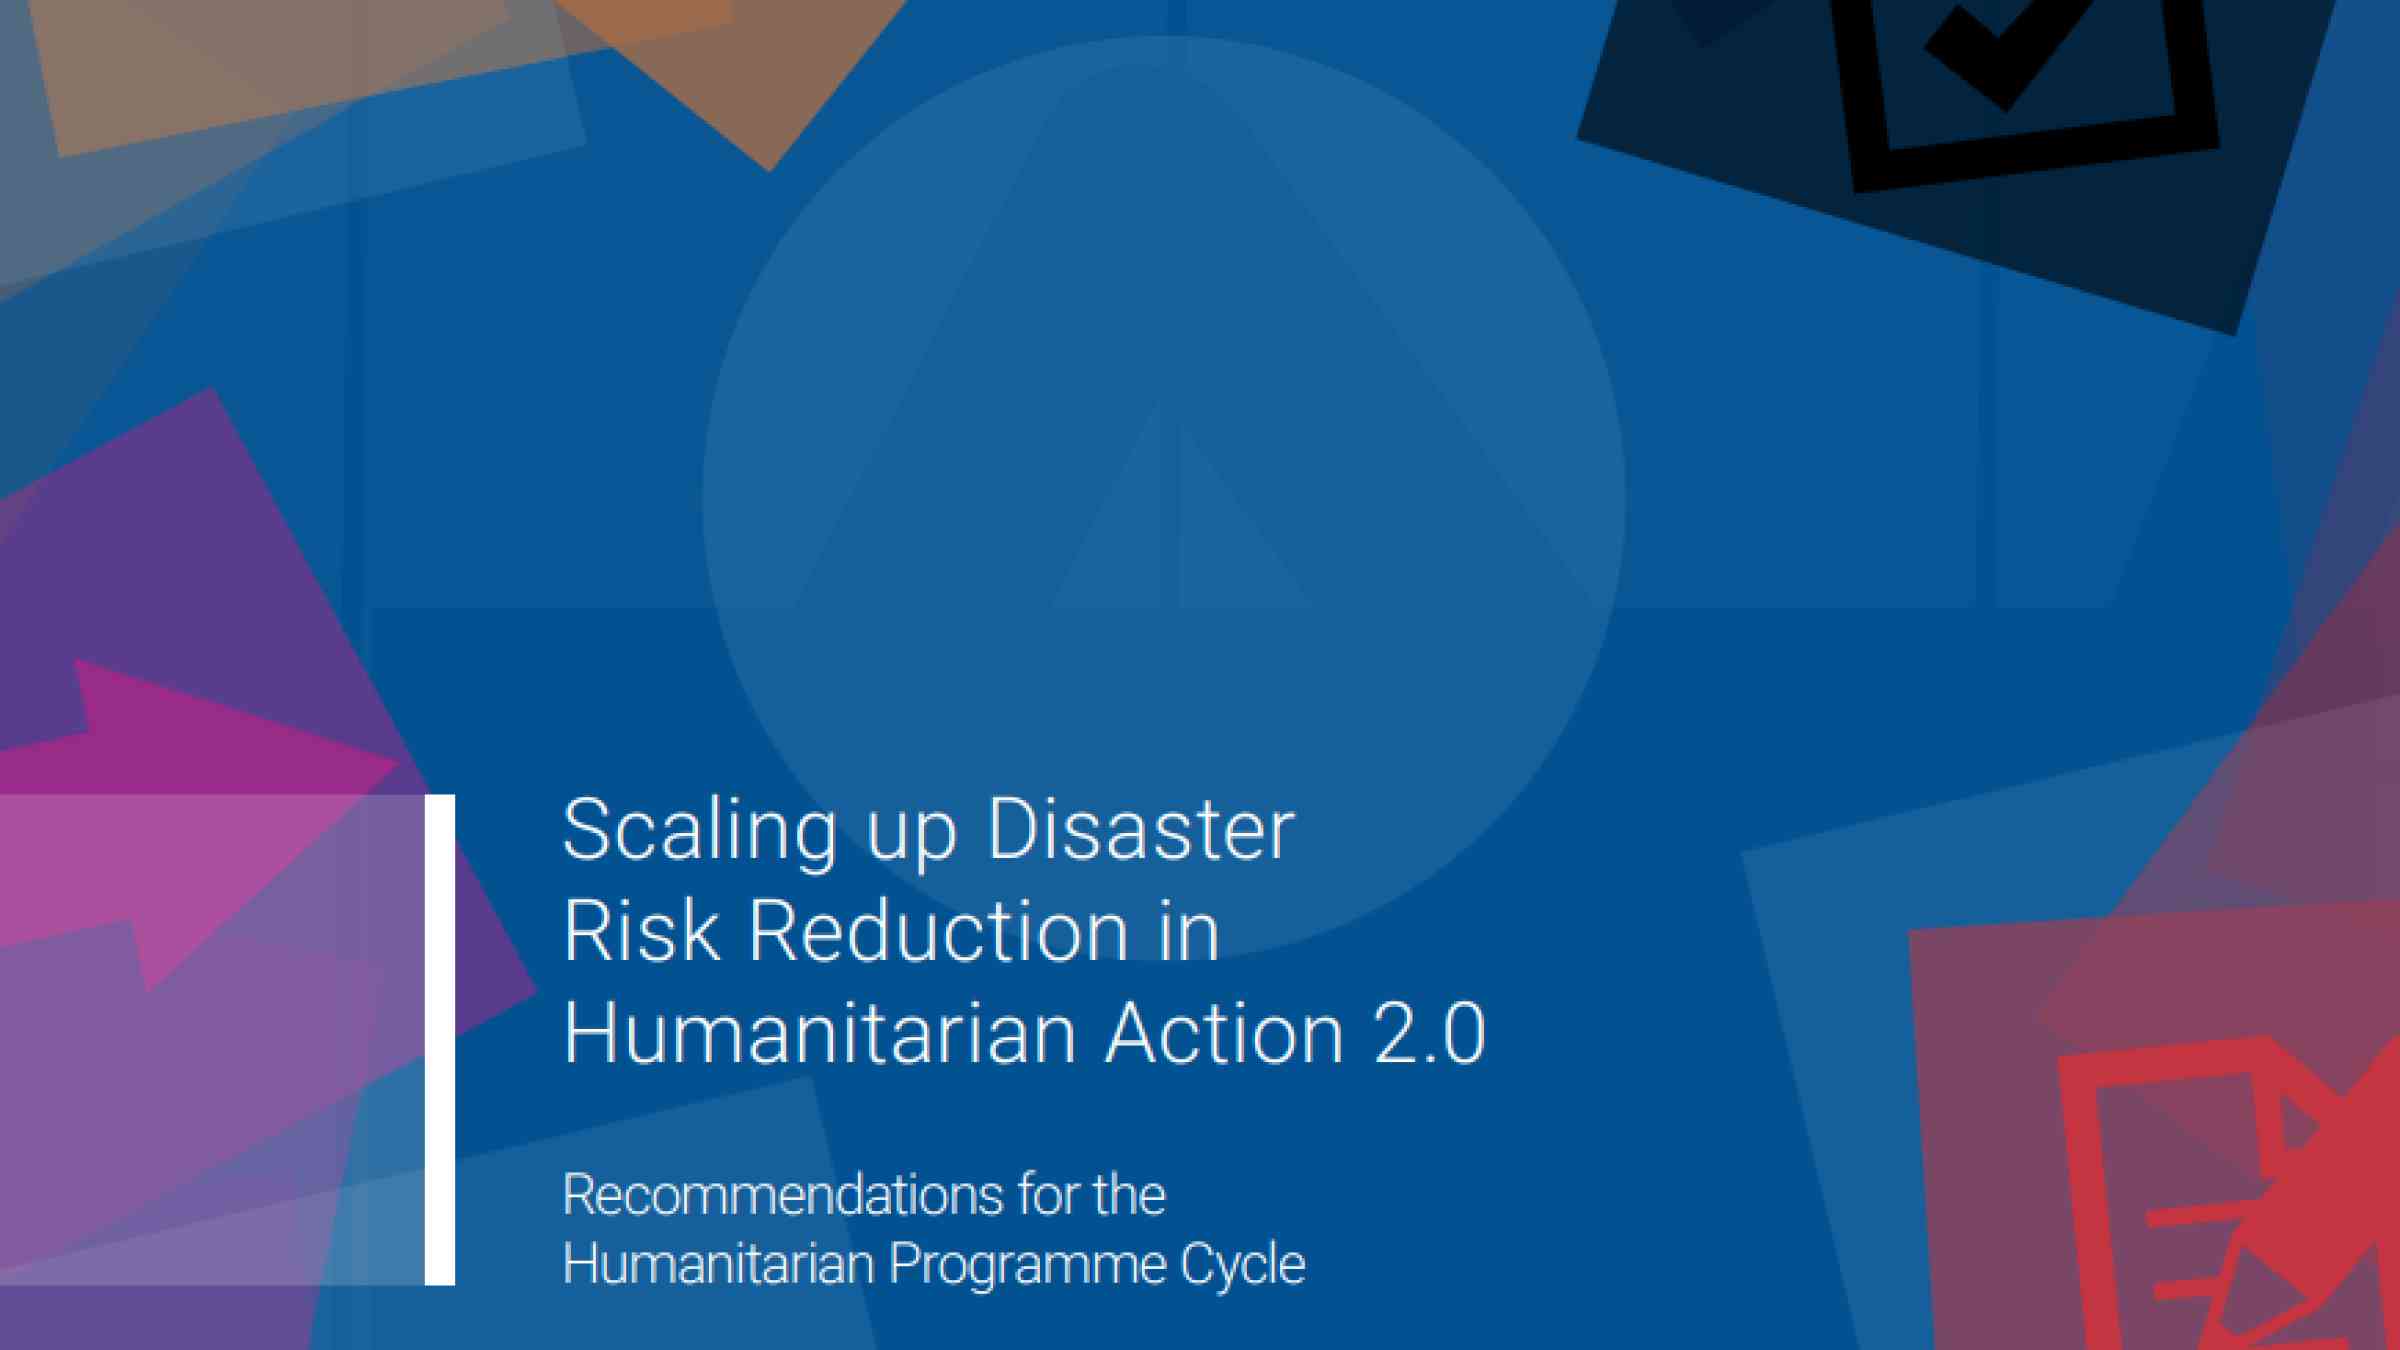 Scaling up disaster risk reduction in humanitarian action